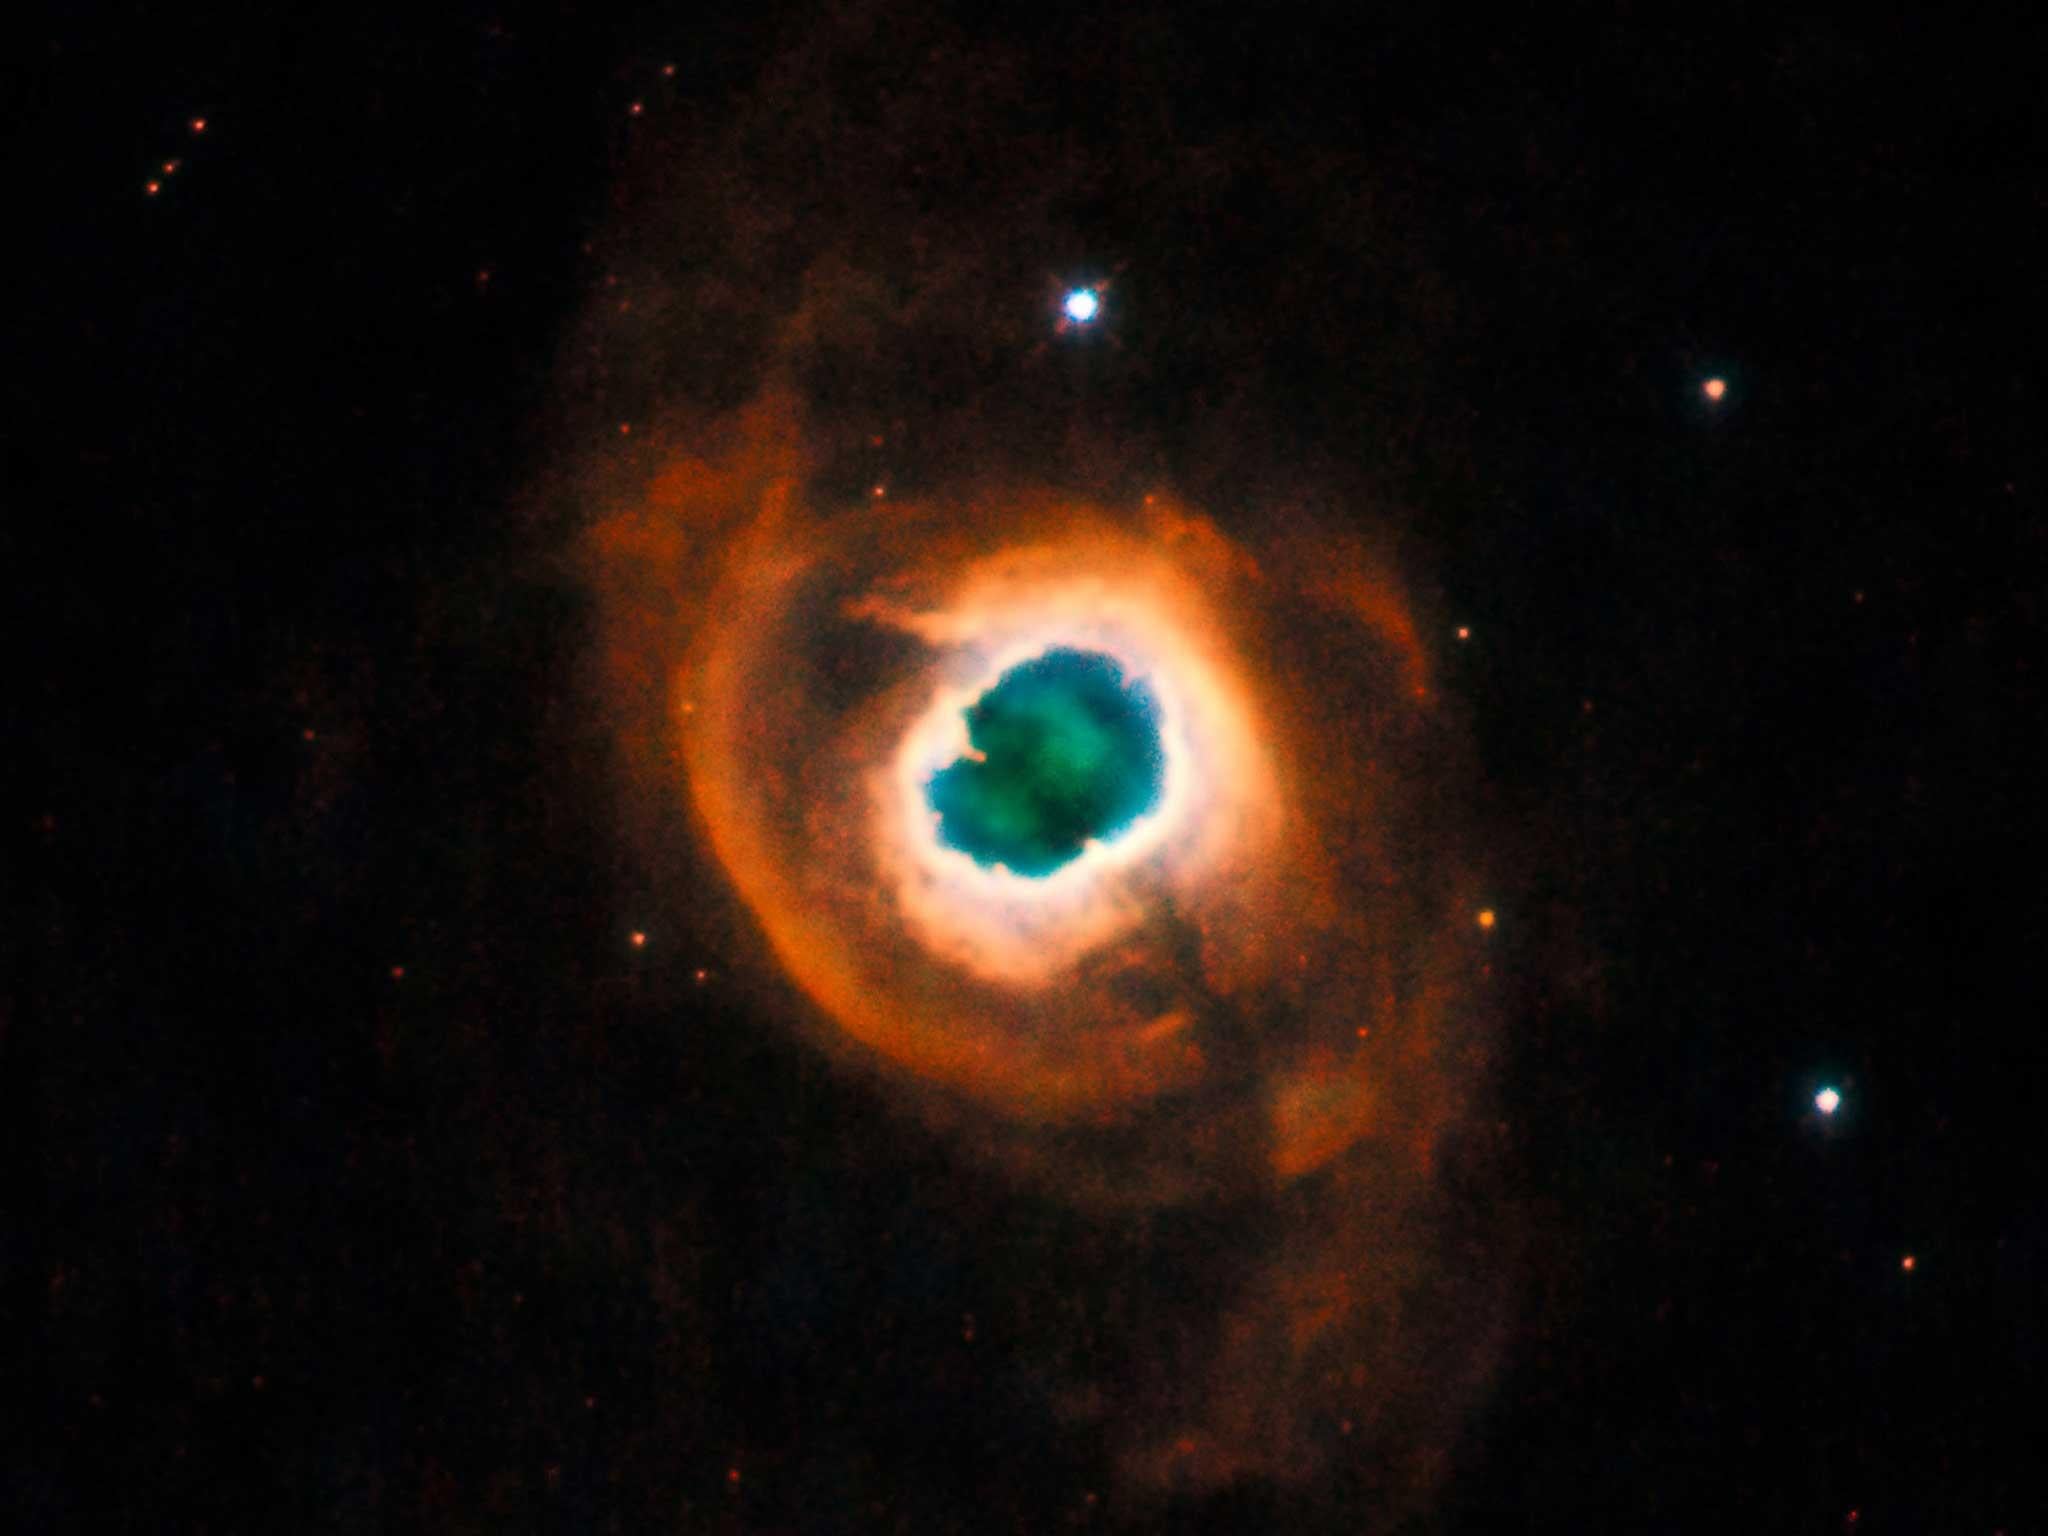 A nebula named Knockout 4-55 (or K 4-55) photographed by Hubble in 2009